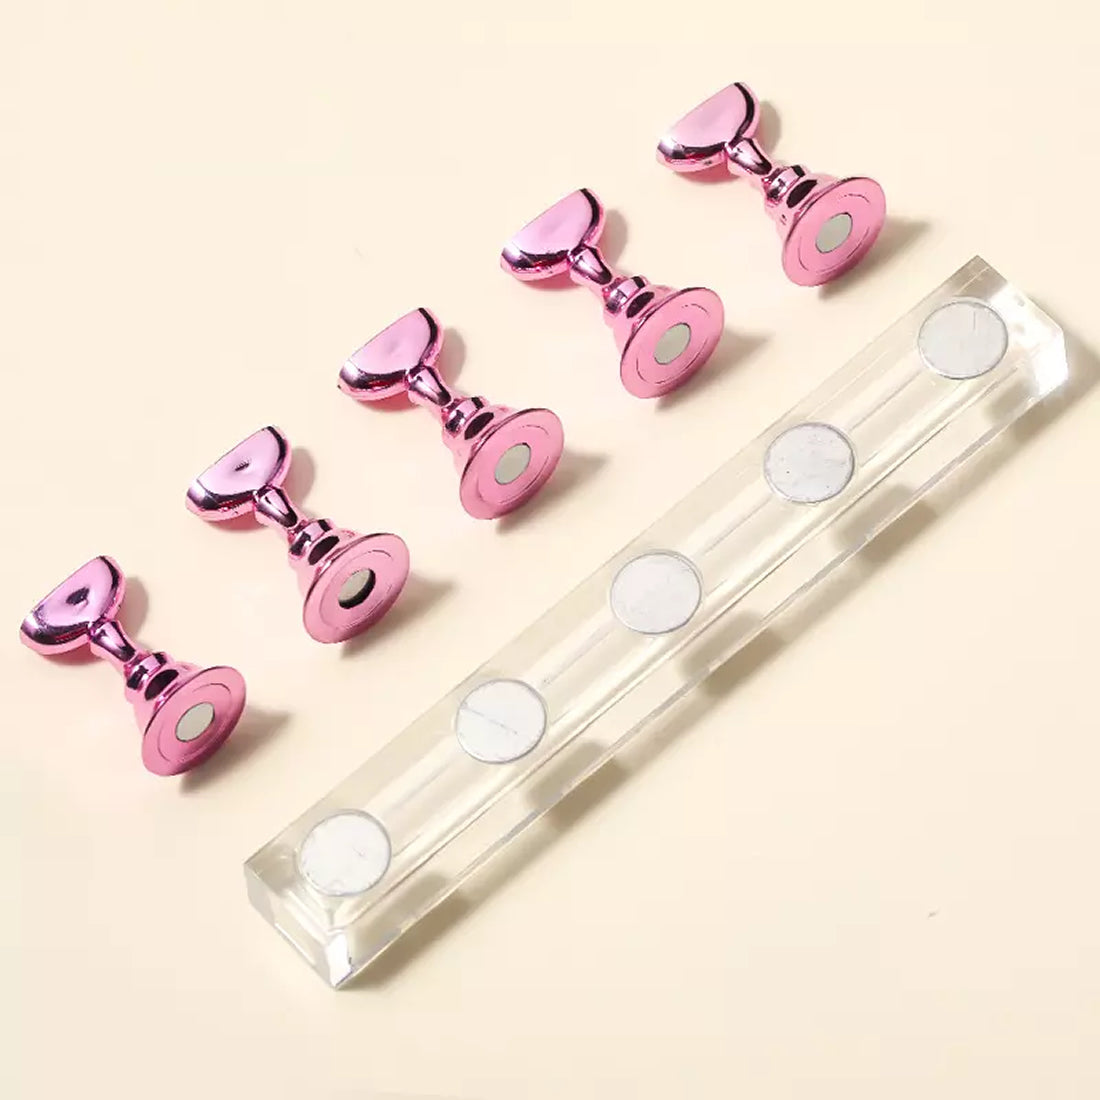 Magnetic Nail Tip Holder Stand for Artificial Acrylic Nail Tip Display & For Nail Art Design